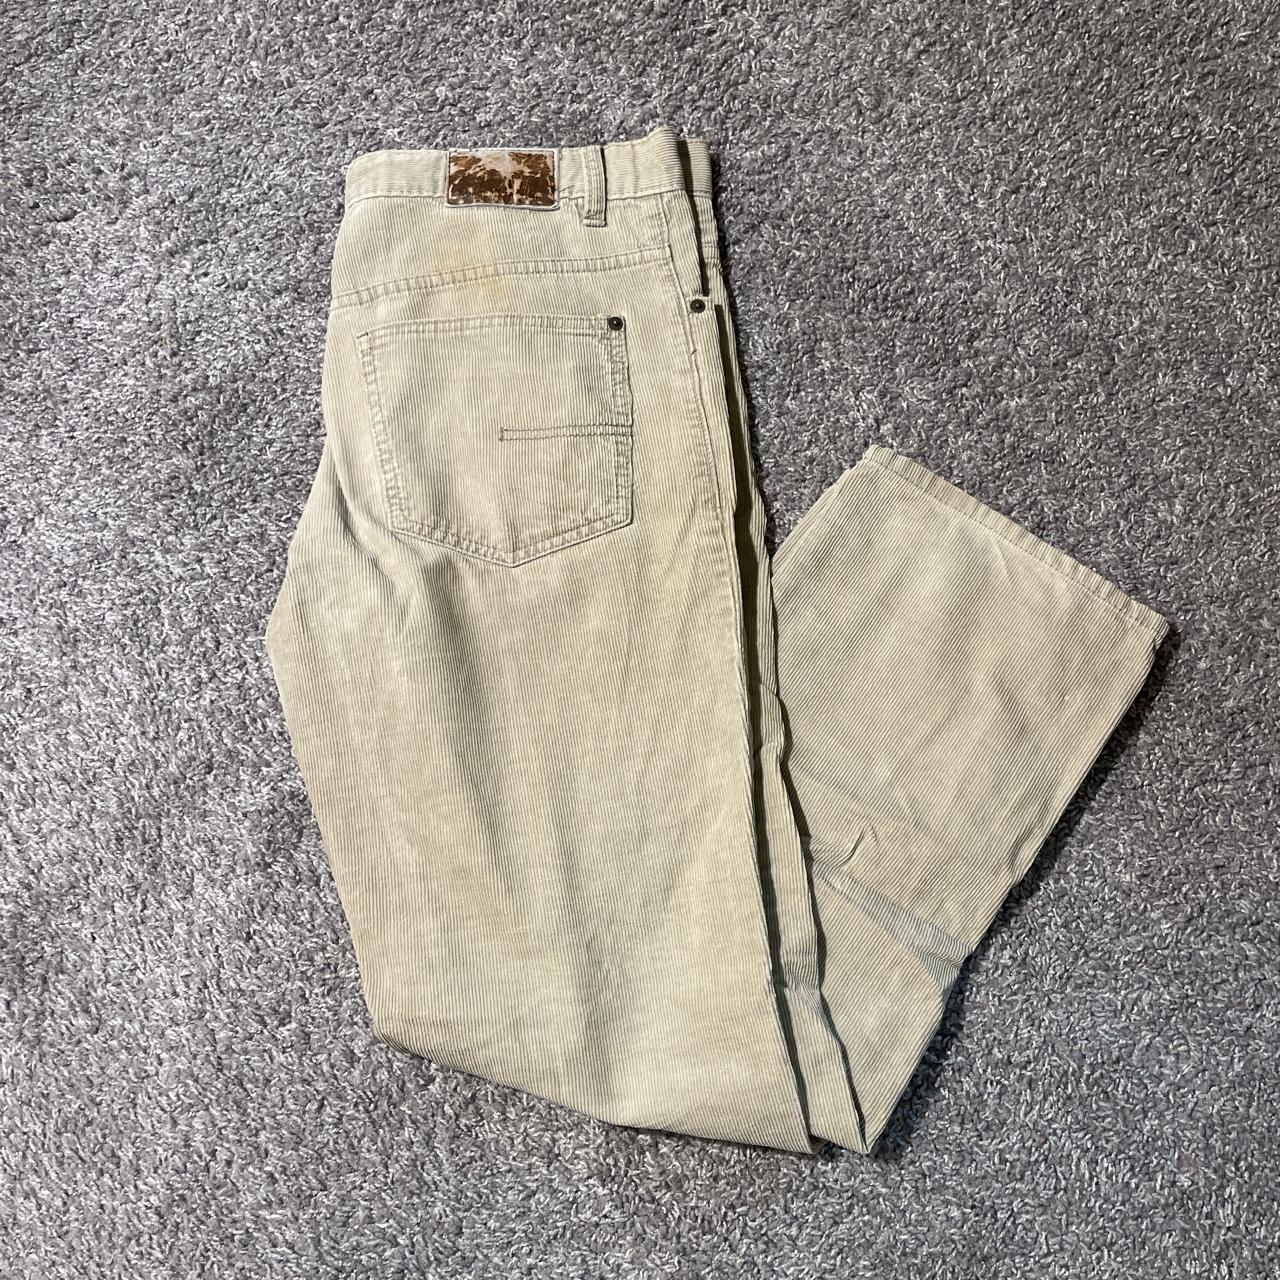 MENS VINTAGE RELAXED STRAIGHT FIT CALVIN KLEIN JEANS... - Depop